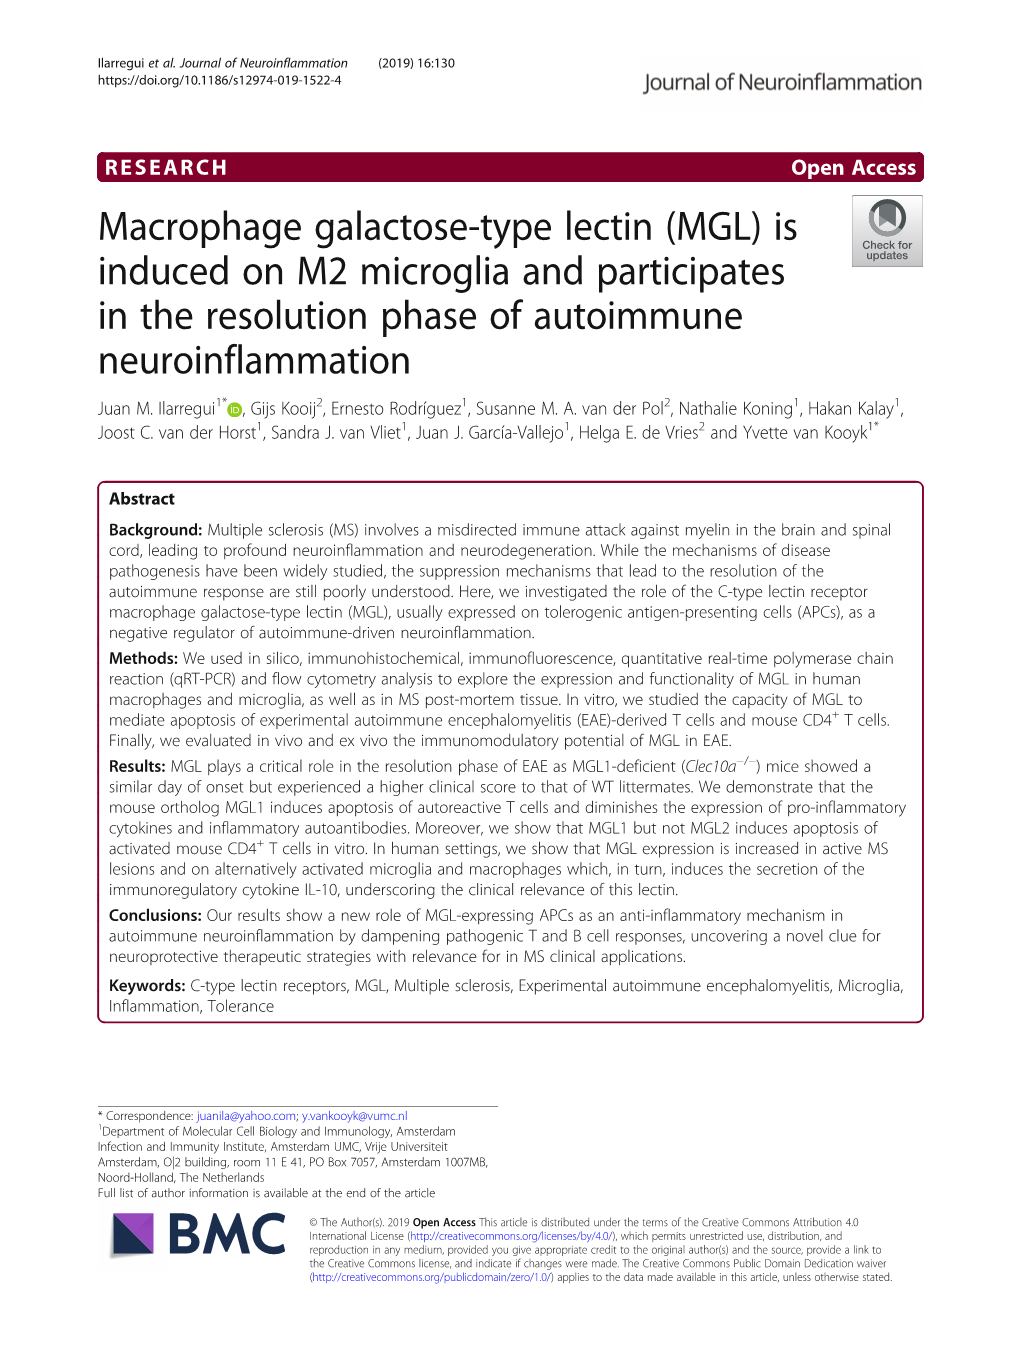 Macrophage Galactose-Type Lectin (MGL) Is Induced on M2 Microglia and Participates in the Resolution Phase of Autoimmune Neuroinflammation Juan M